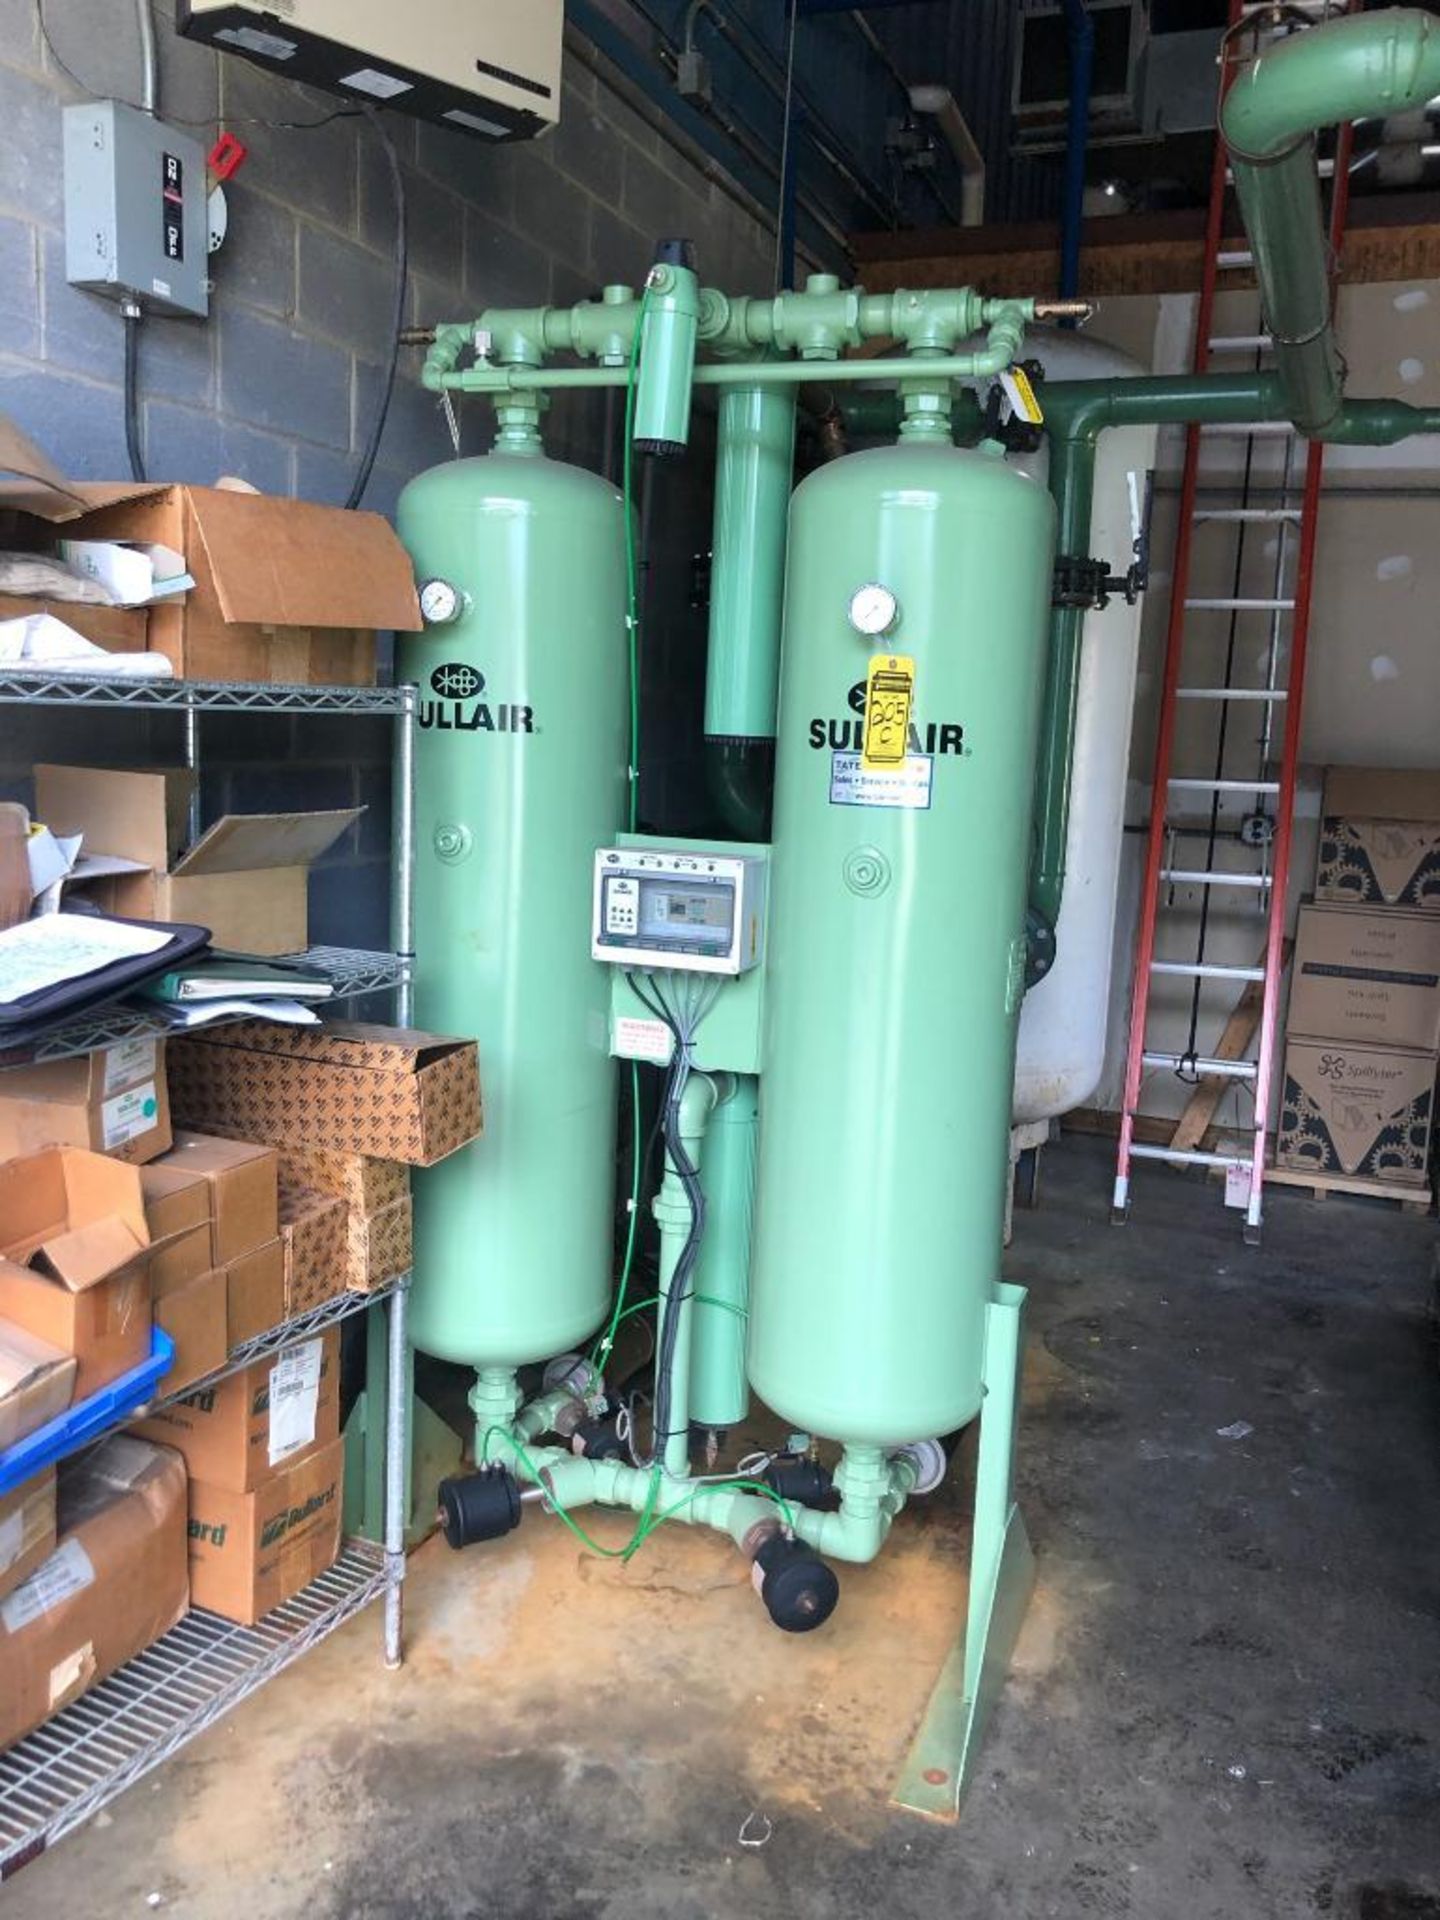 SULLAIR AIR DRYER (2) 50-GAL. TANKS, MODEL DHL600, S/N HDMGAAM965, JULY 2015 DATE OF MANUFACTURE